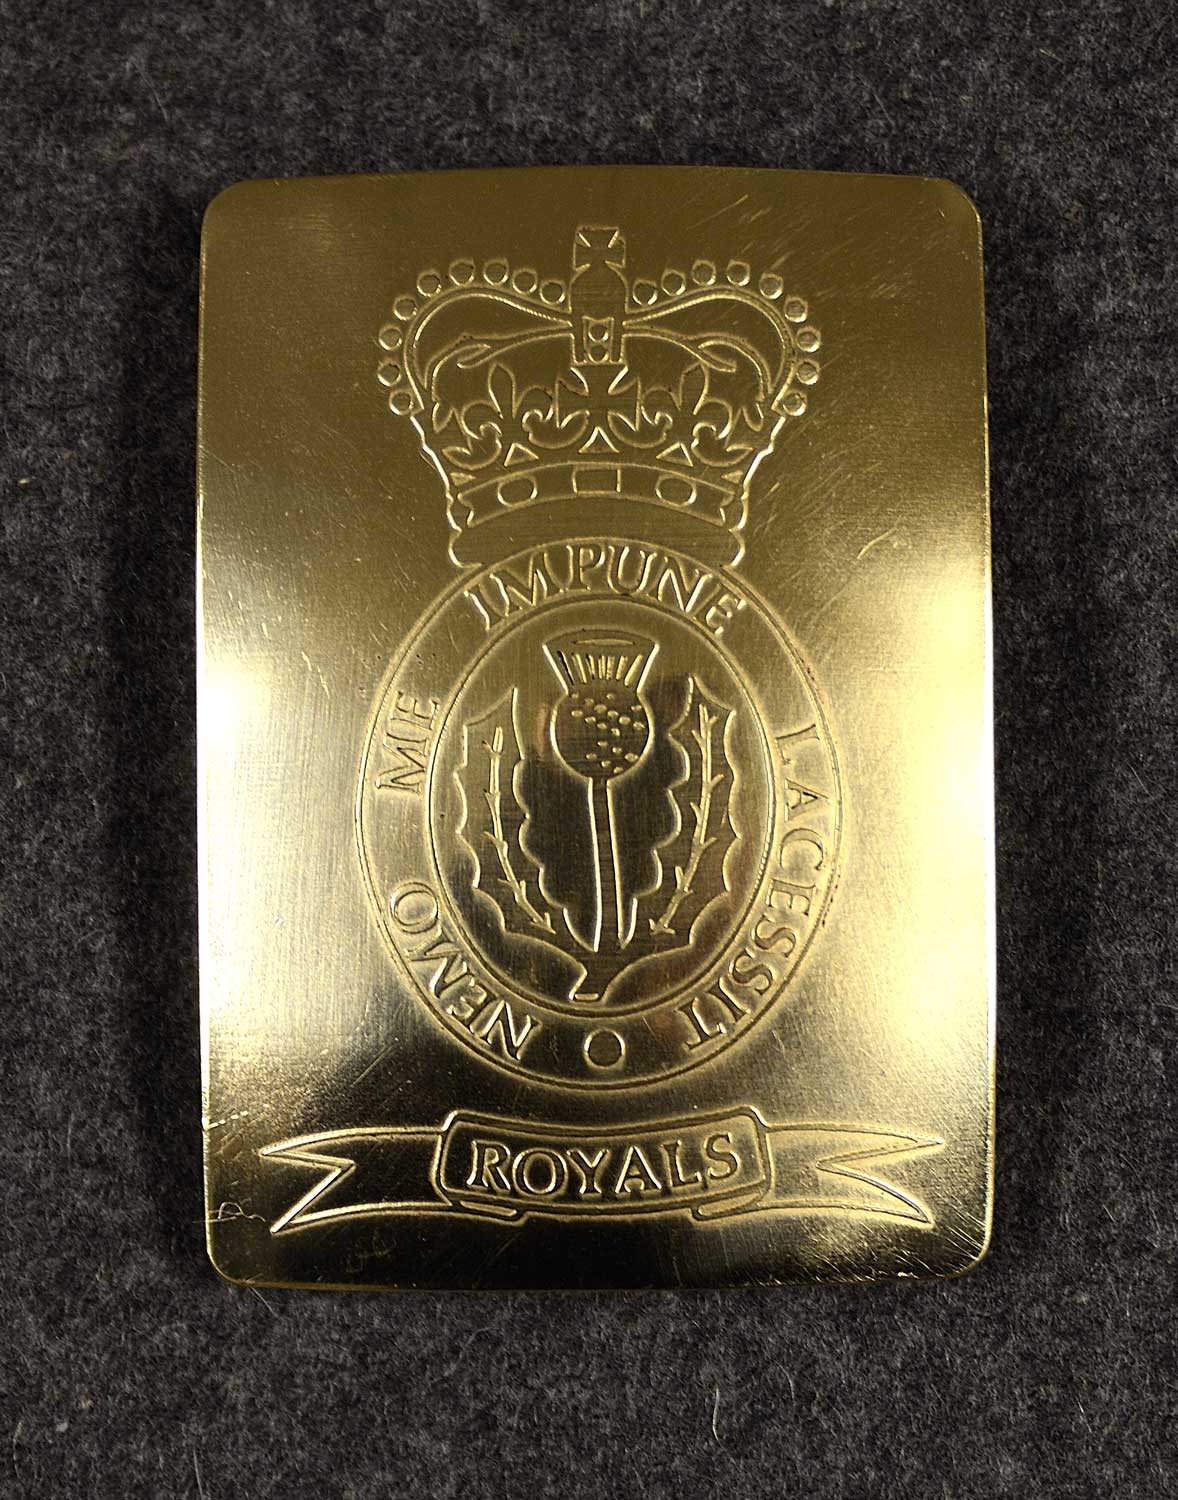 British, 1st (or Royal Scots) Regiment of Foot